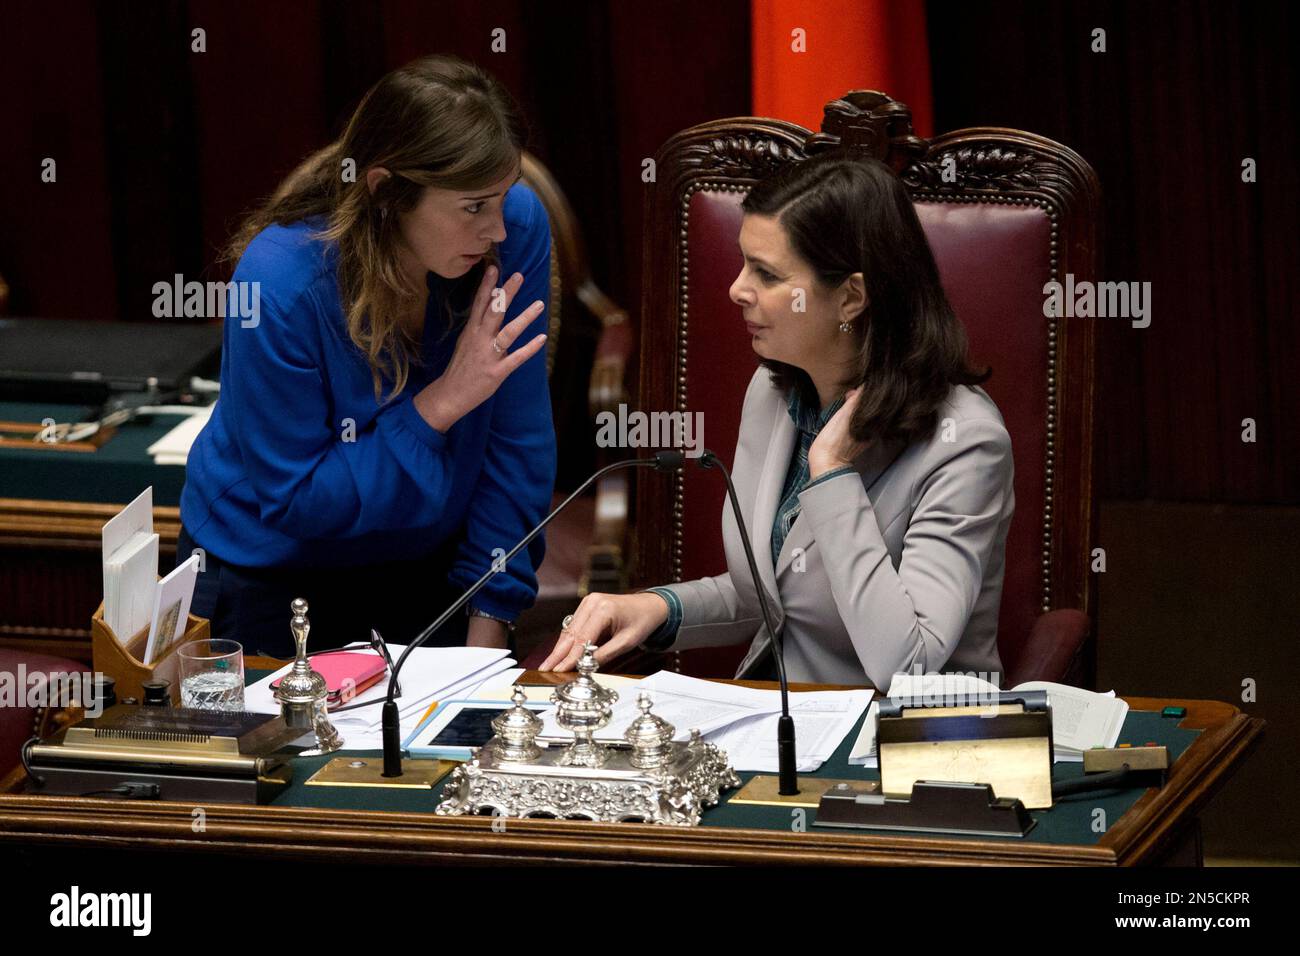 Relations with Parliament Minister Maria Elena Boschi, left, talks with Lower Chamber spokeswoman Laura Boldrini prior to a confidence vote in the Chamber of Deputies, in Rome, Tuesday, Feb. 25, 2014. The Senate voted 169-139 to confirm Premier Matteo Renzi's broad coalition, which ranges from his center-left Democrats to center-right forces formerly loyal to ex-premier Silvio Berlusconi. Renzi needed at least 155 votes to clinch the victory, one of two mandatory confidence votes. The second vote, in the Chamber of Deputies, is expected later Tuesday. Renzi's coalition has a comfortable majori Stock Photo